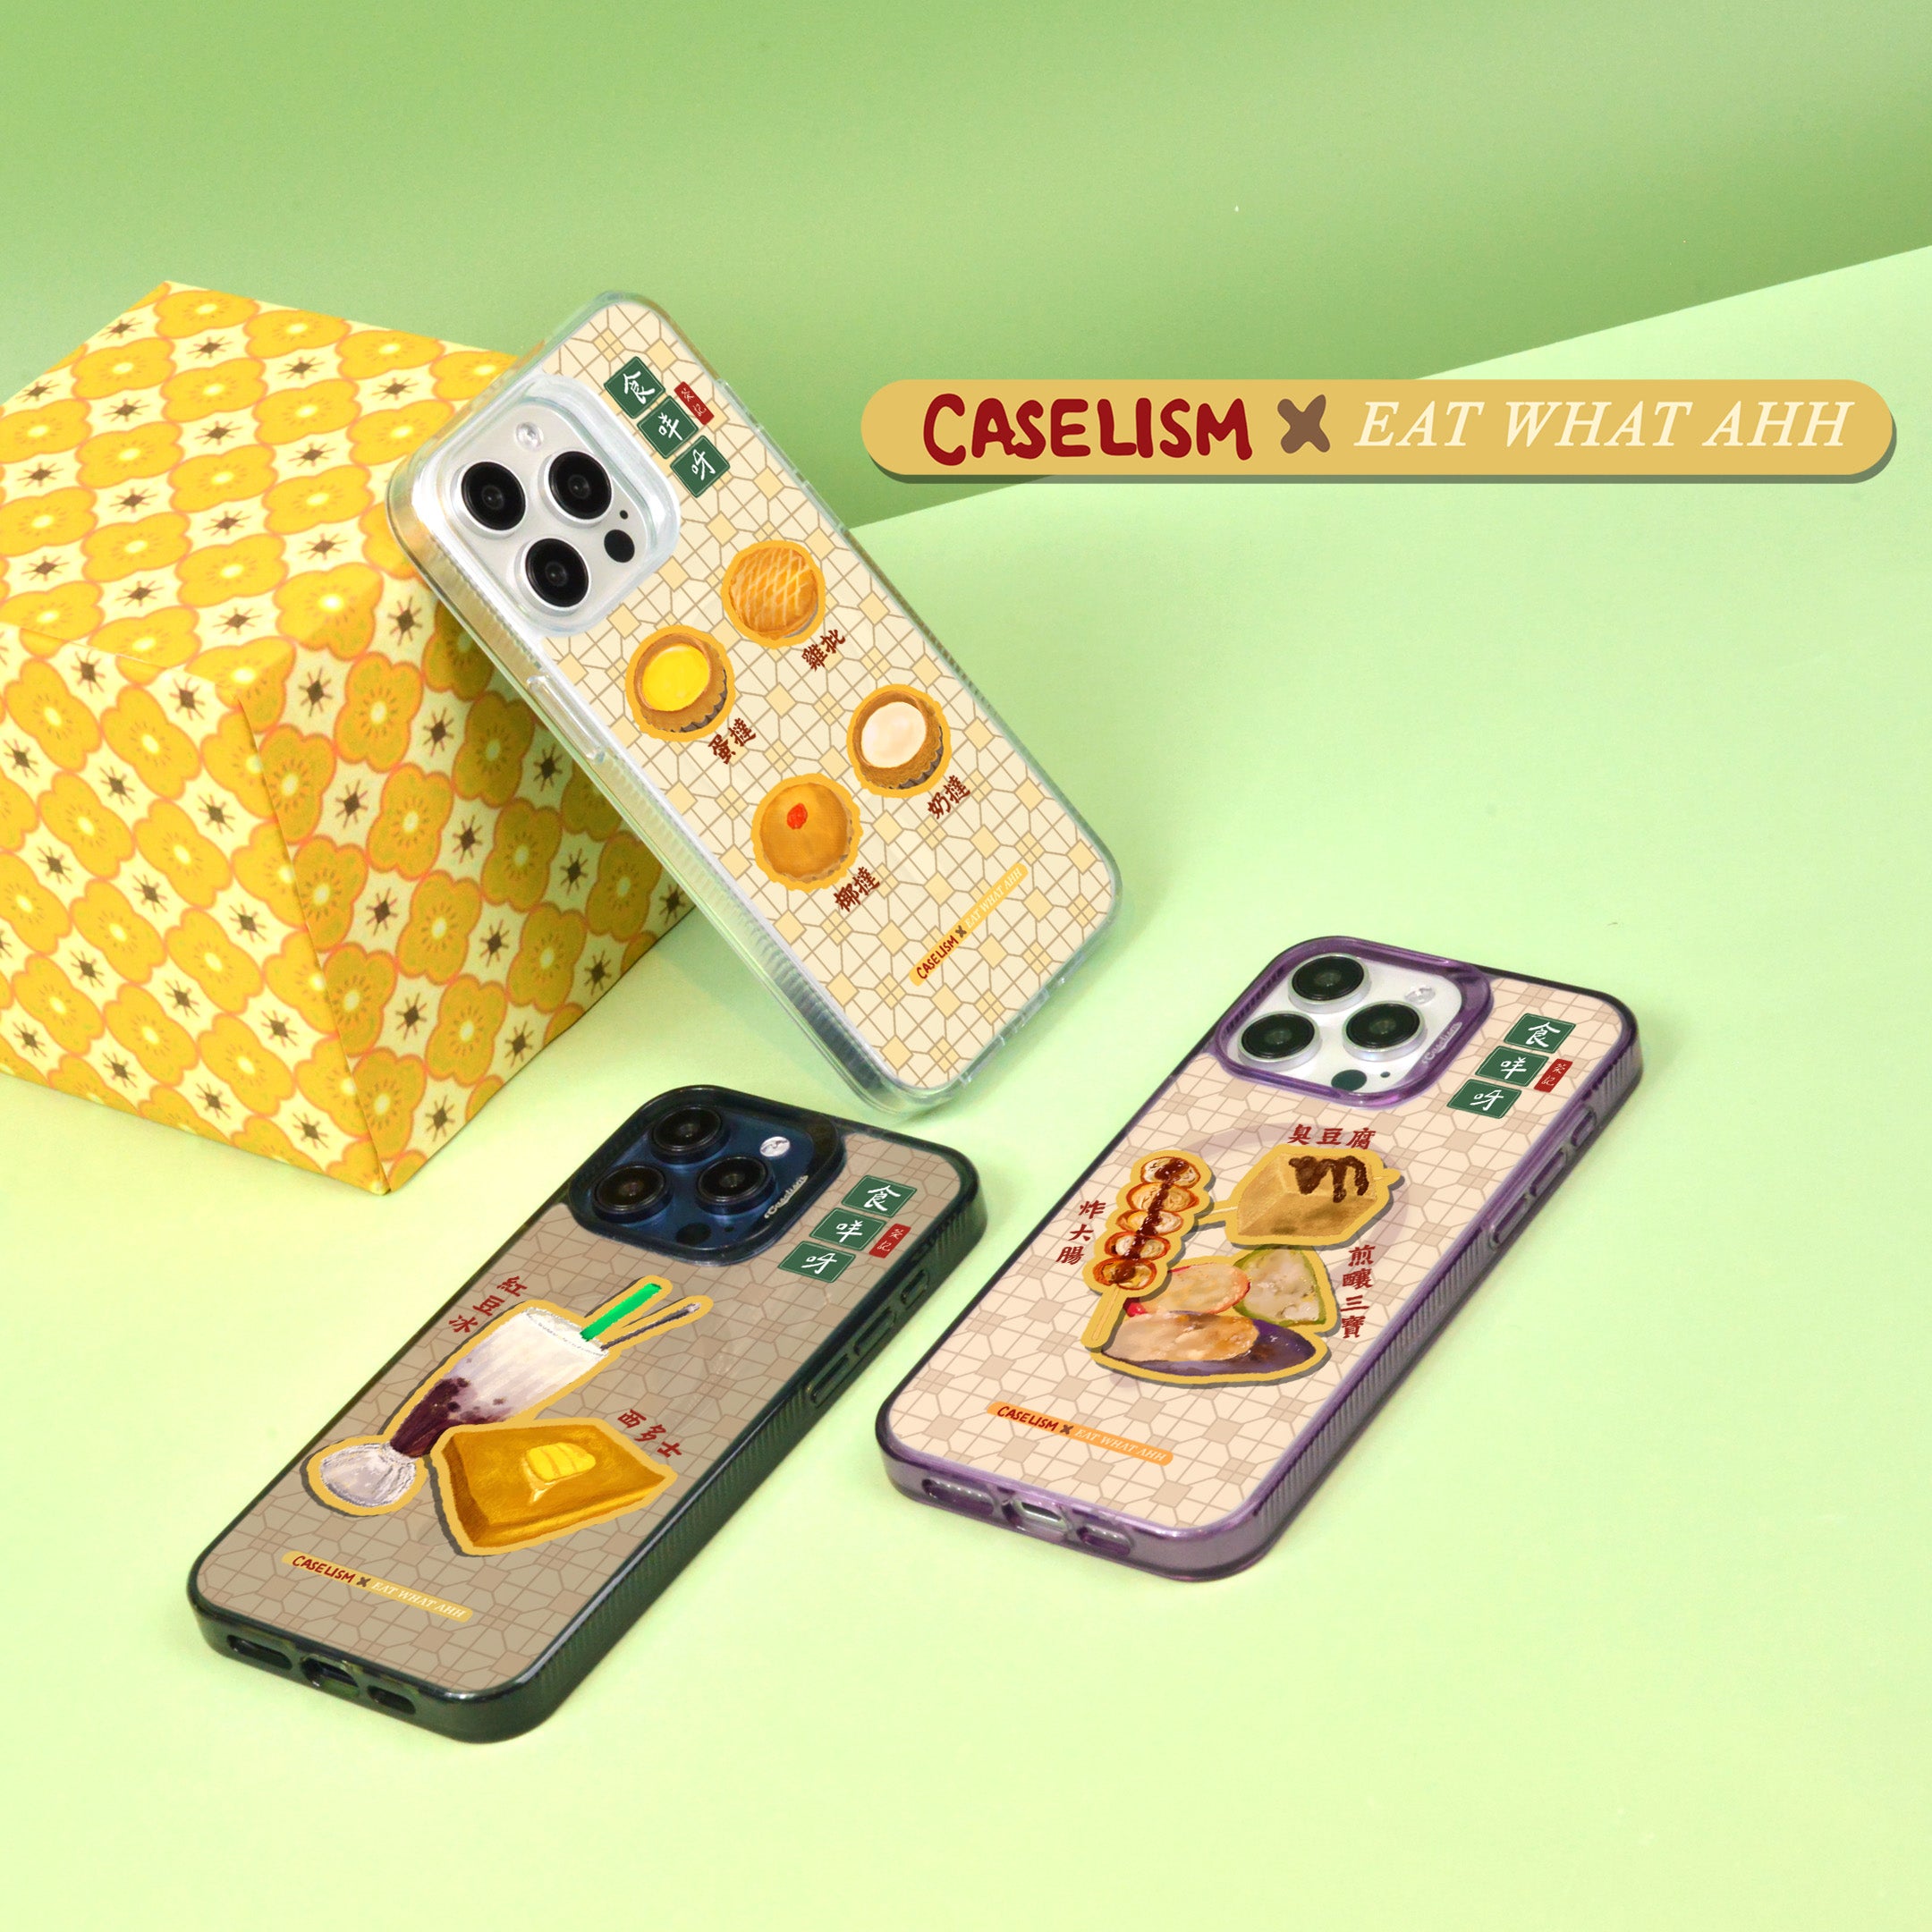 Caselism Collab Phone Case with Eat What Ahh